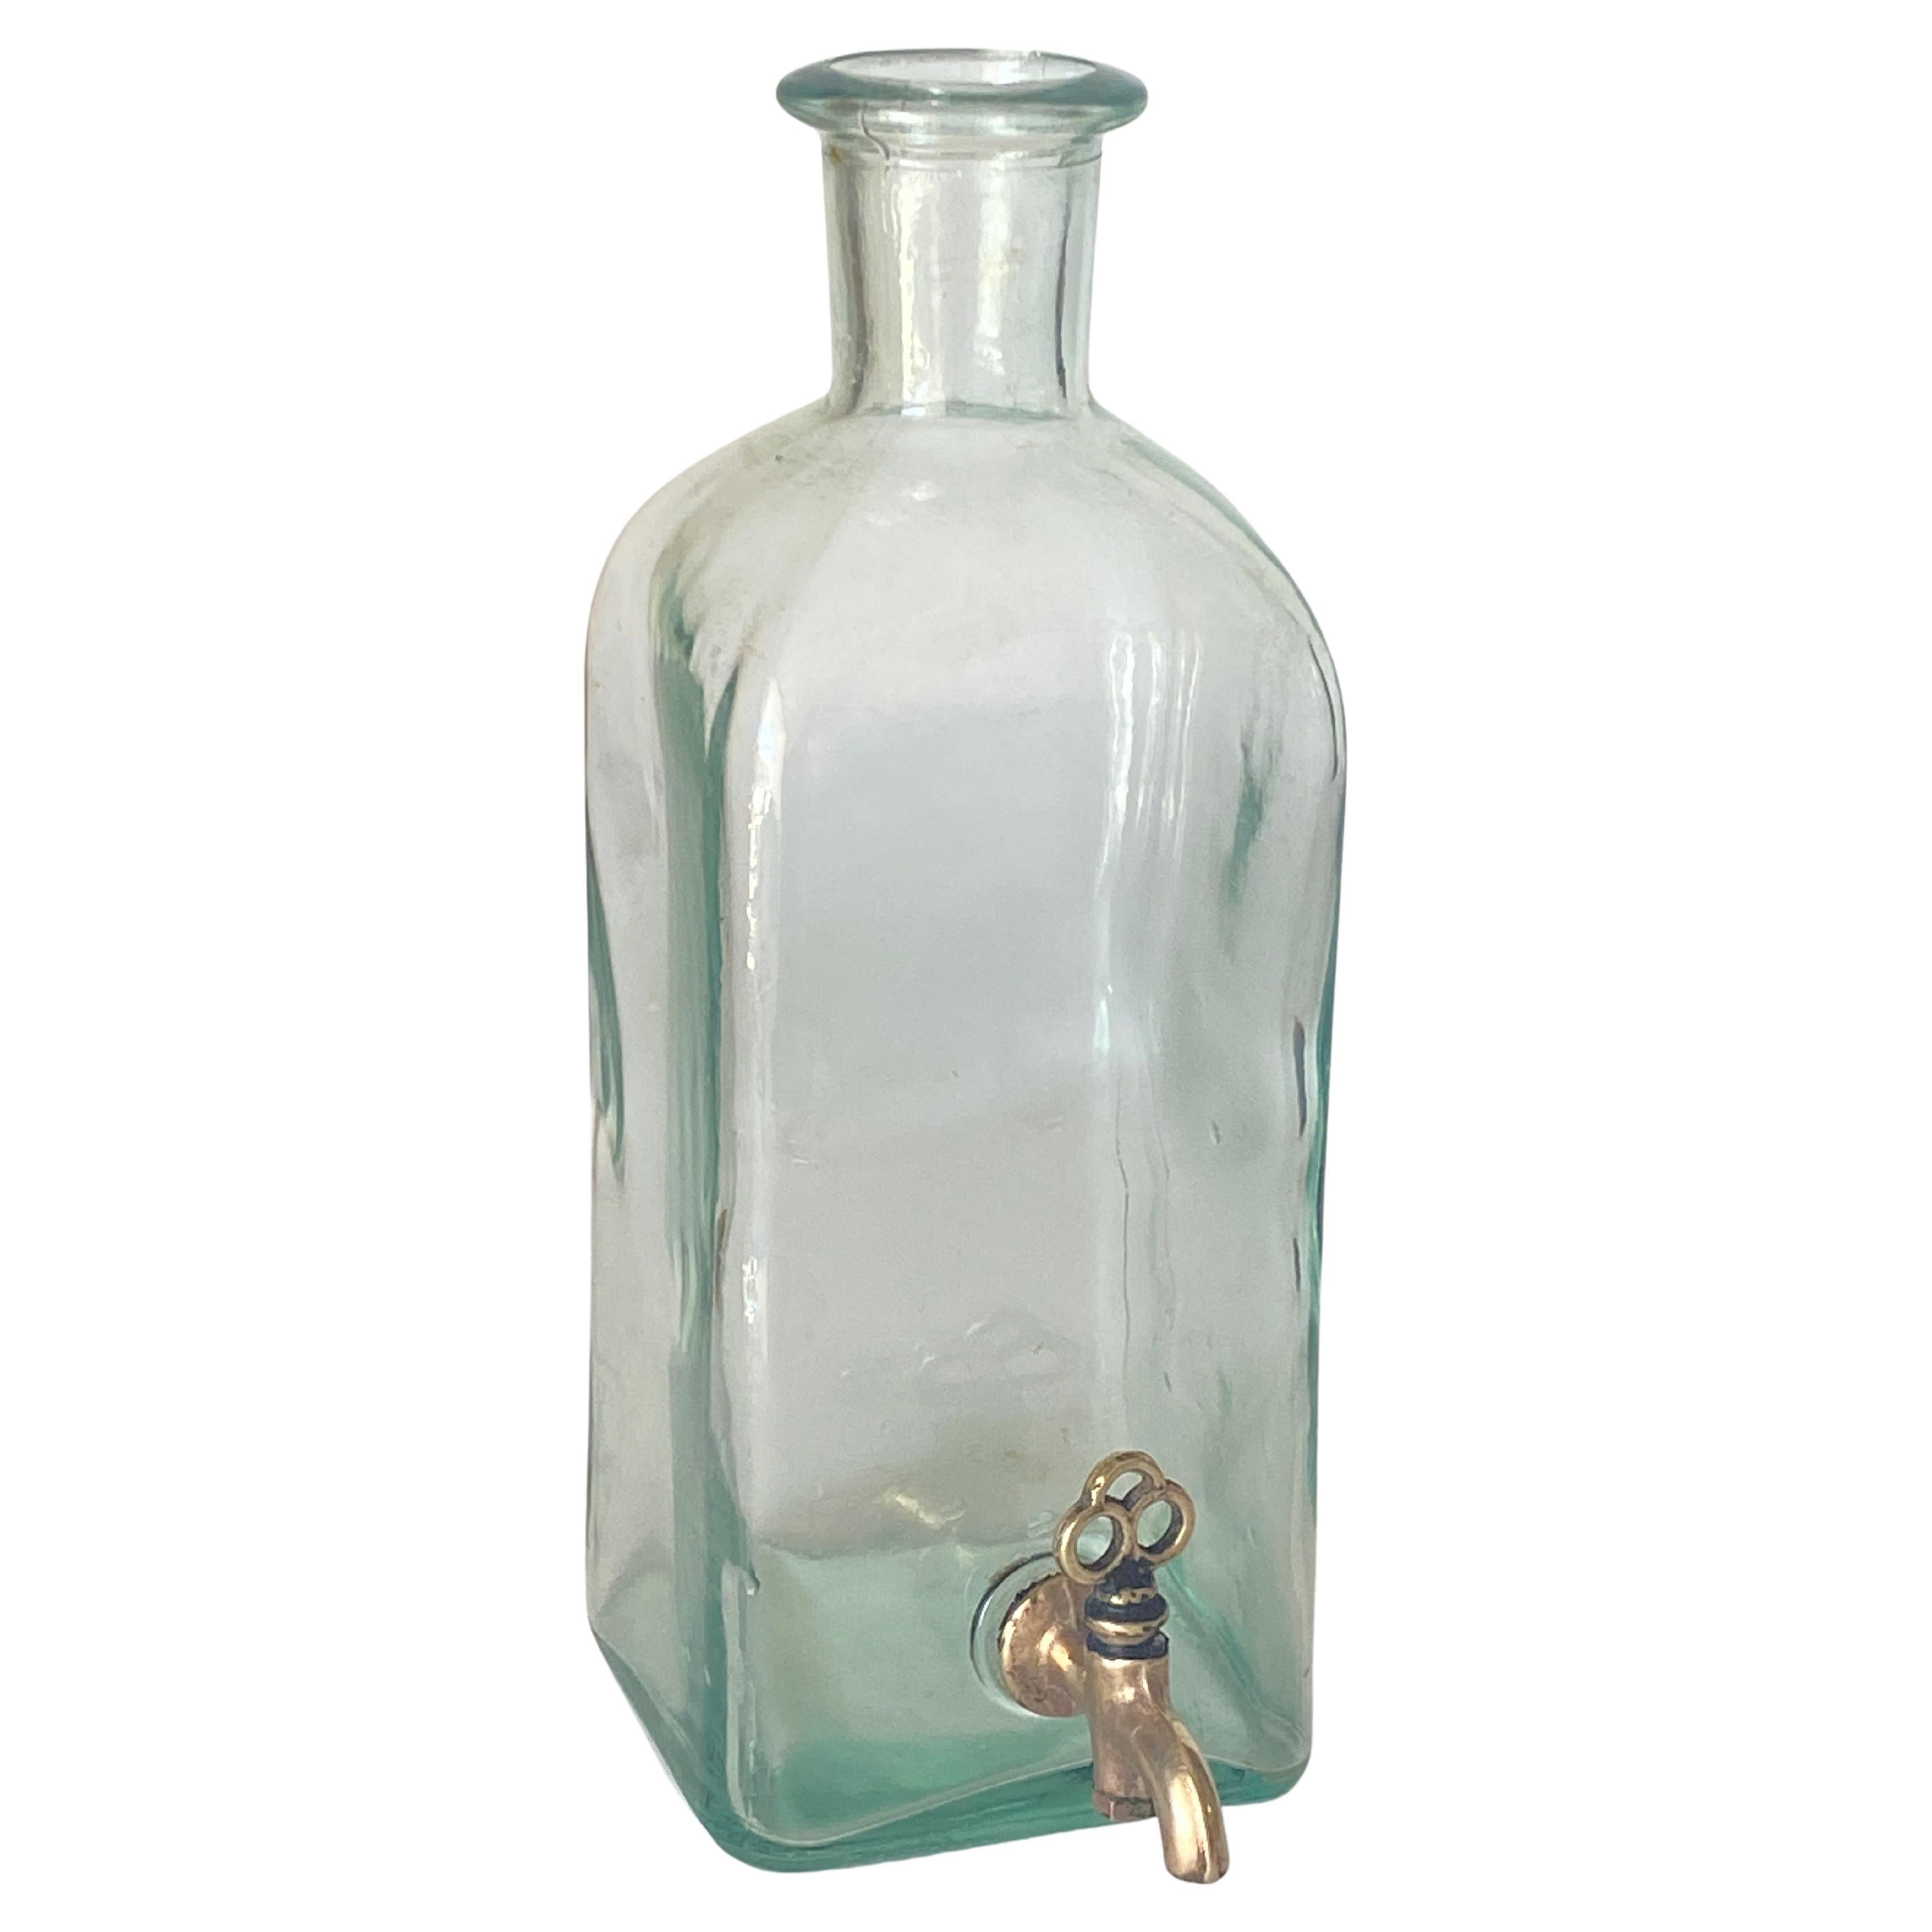 French Decorative Bottle with a Brass Faucet, 1930s